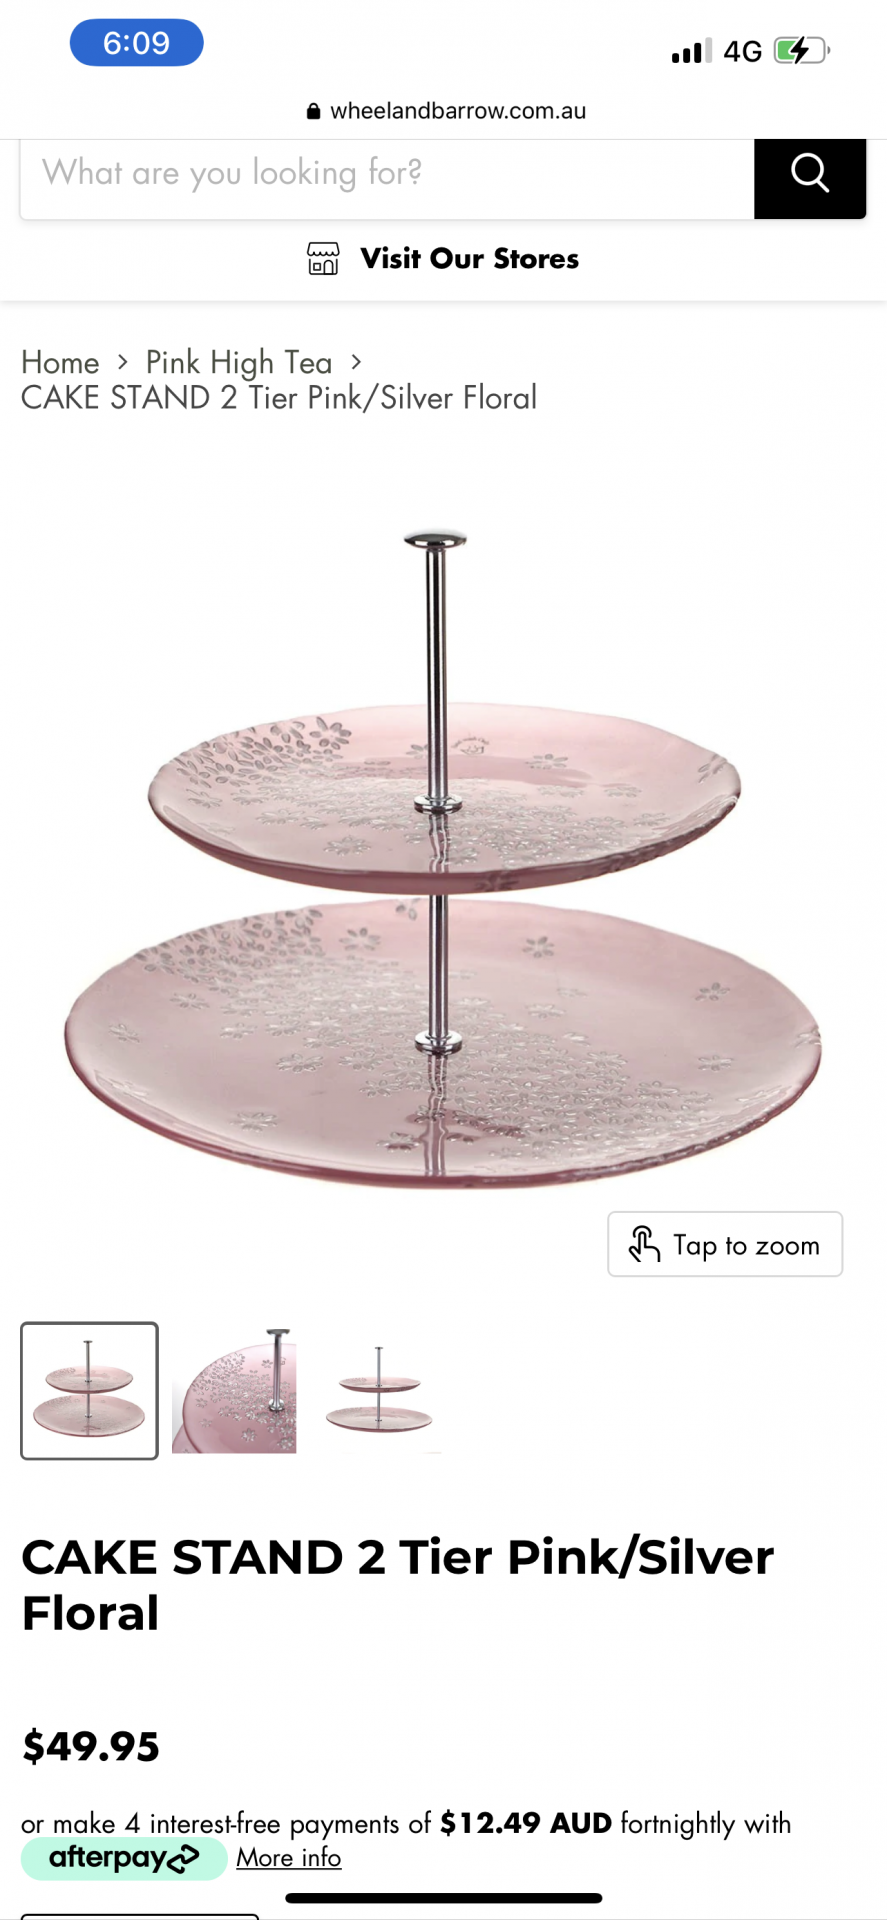 CAKE STAND 2 Tier Pink/Silver Floral